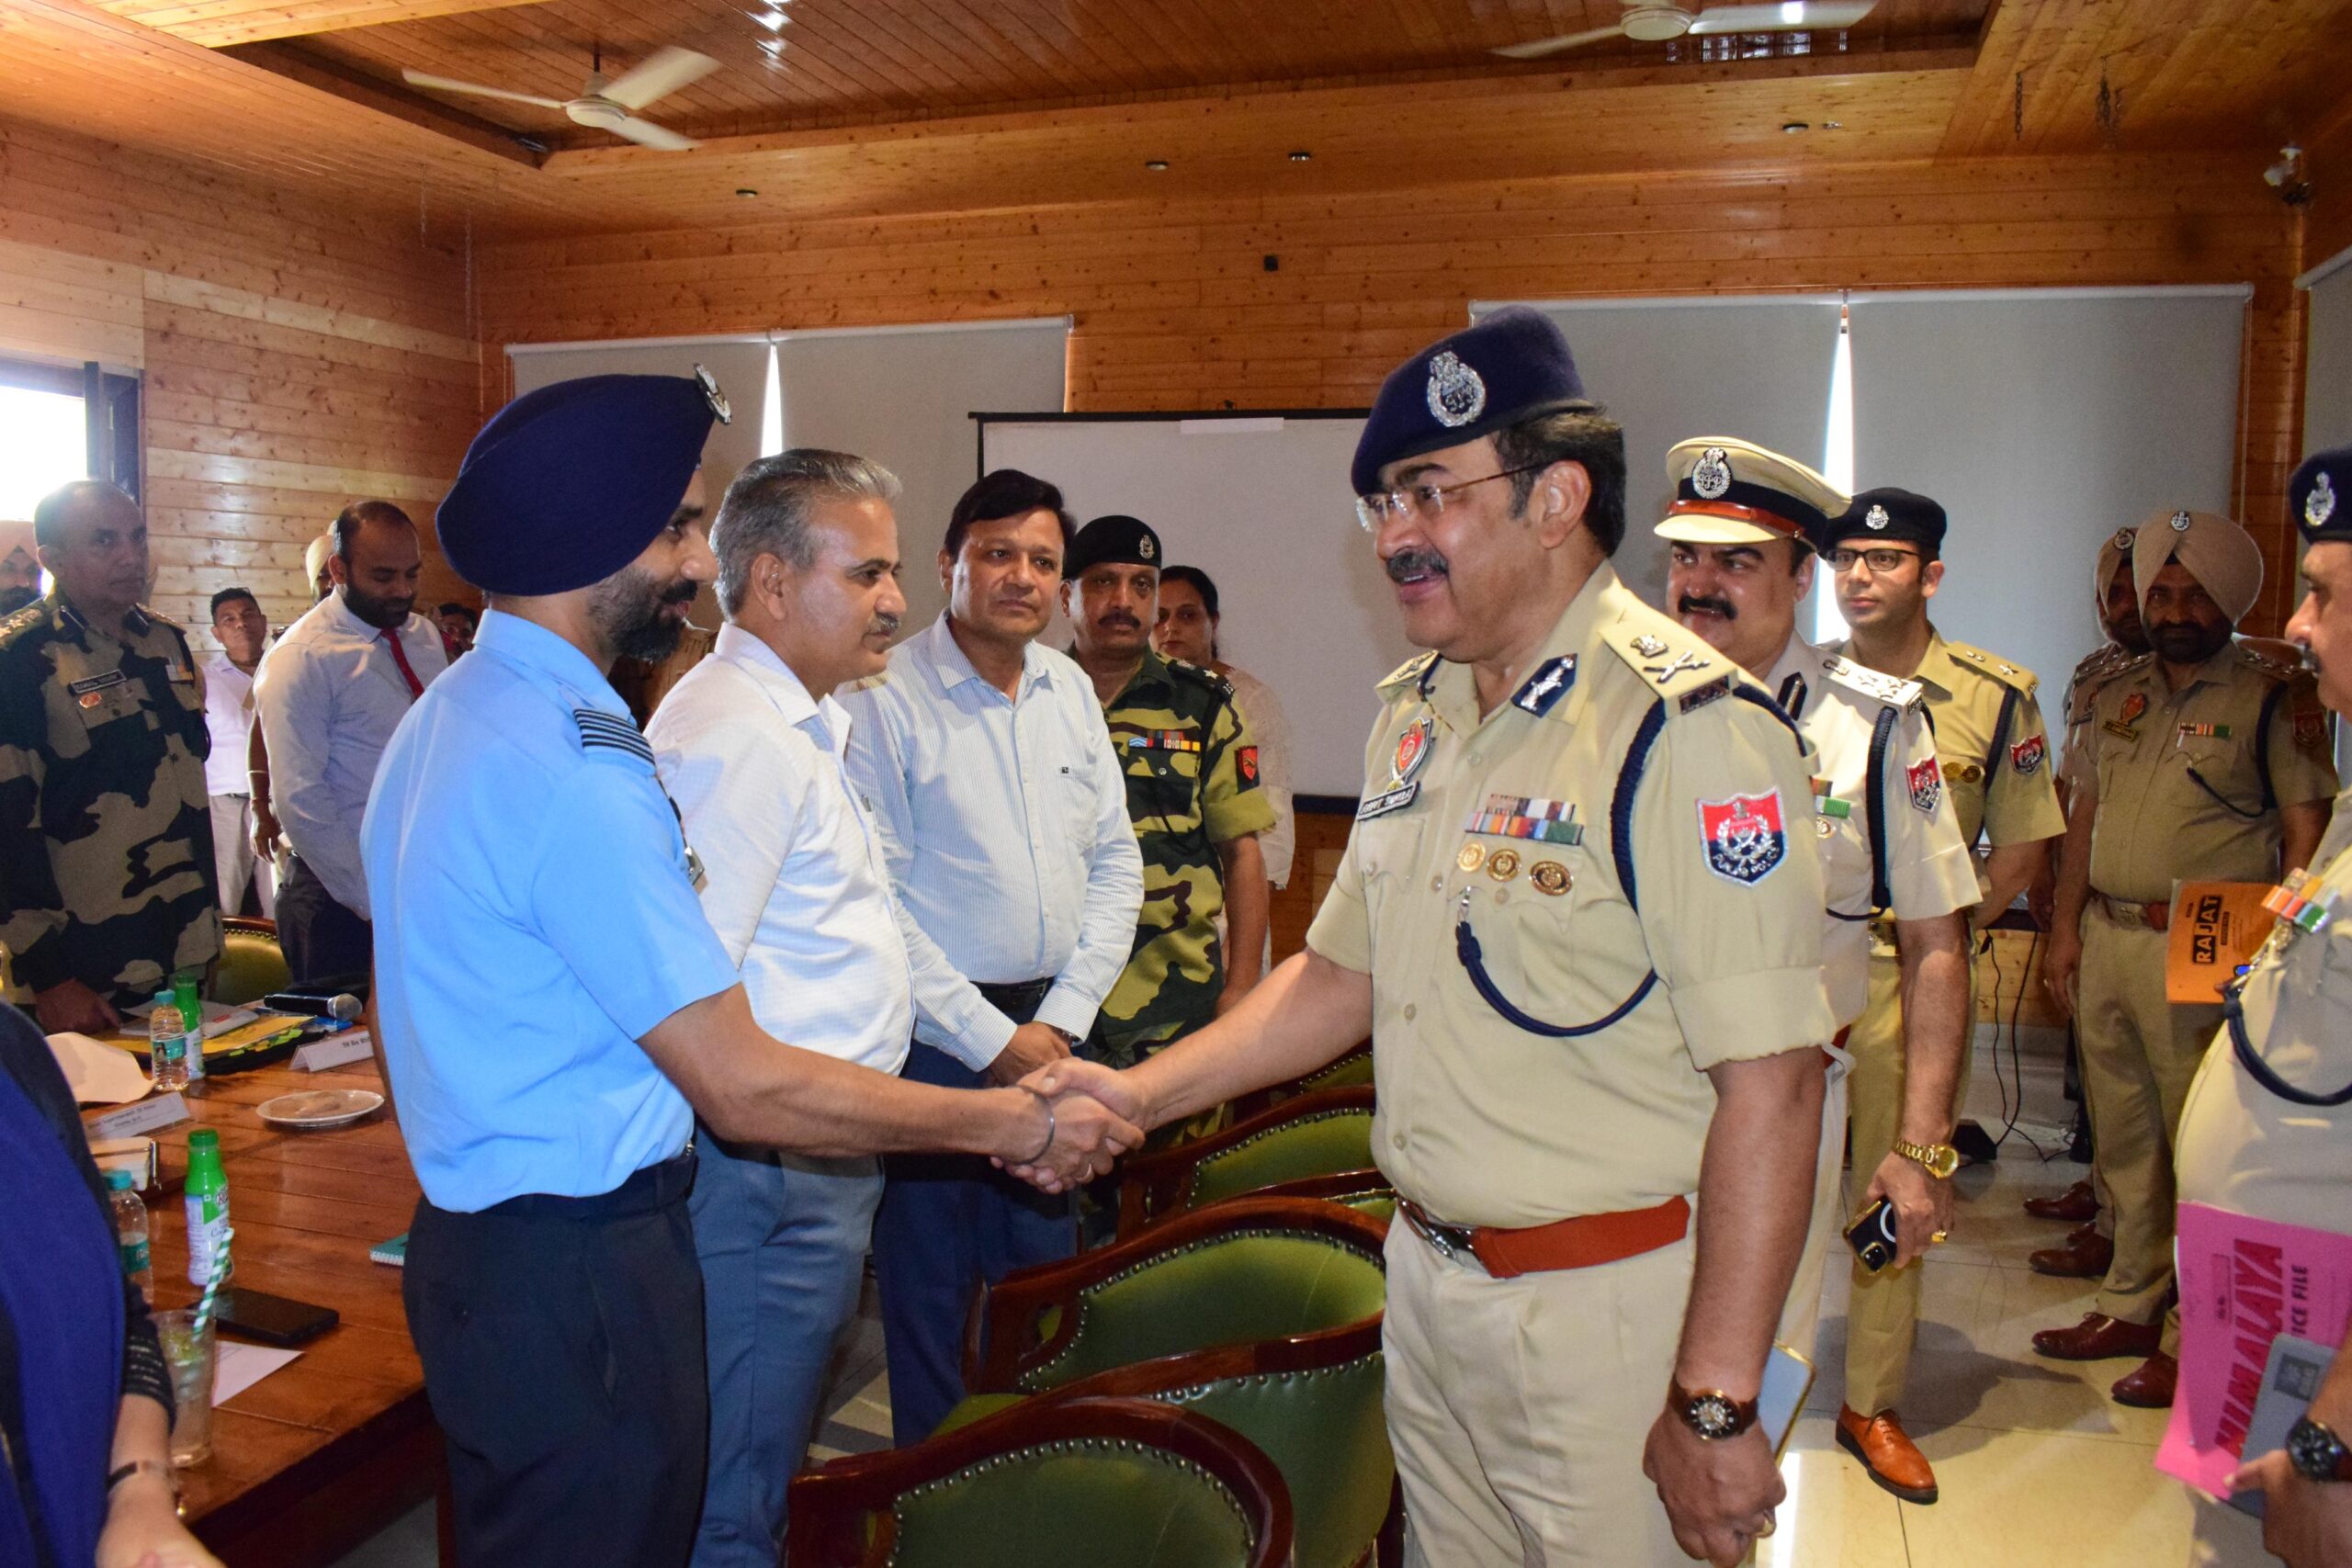 PB Police enhances Level of security in Pathankot&border areas in view of Amarnath yatra&recent Infiltration bid